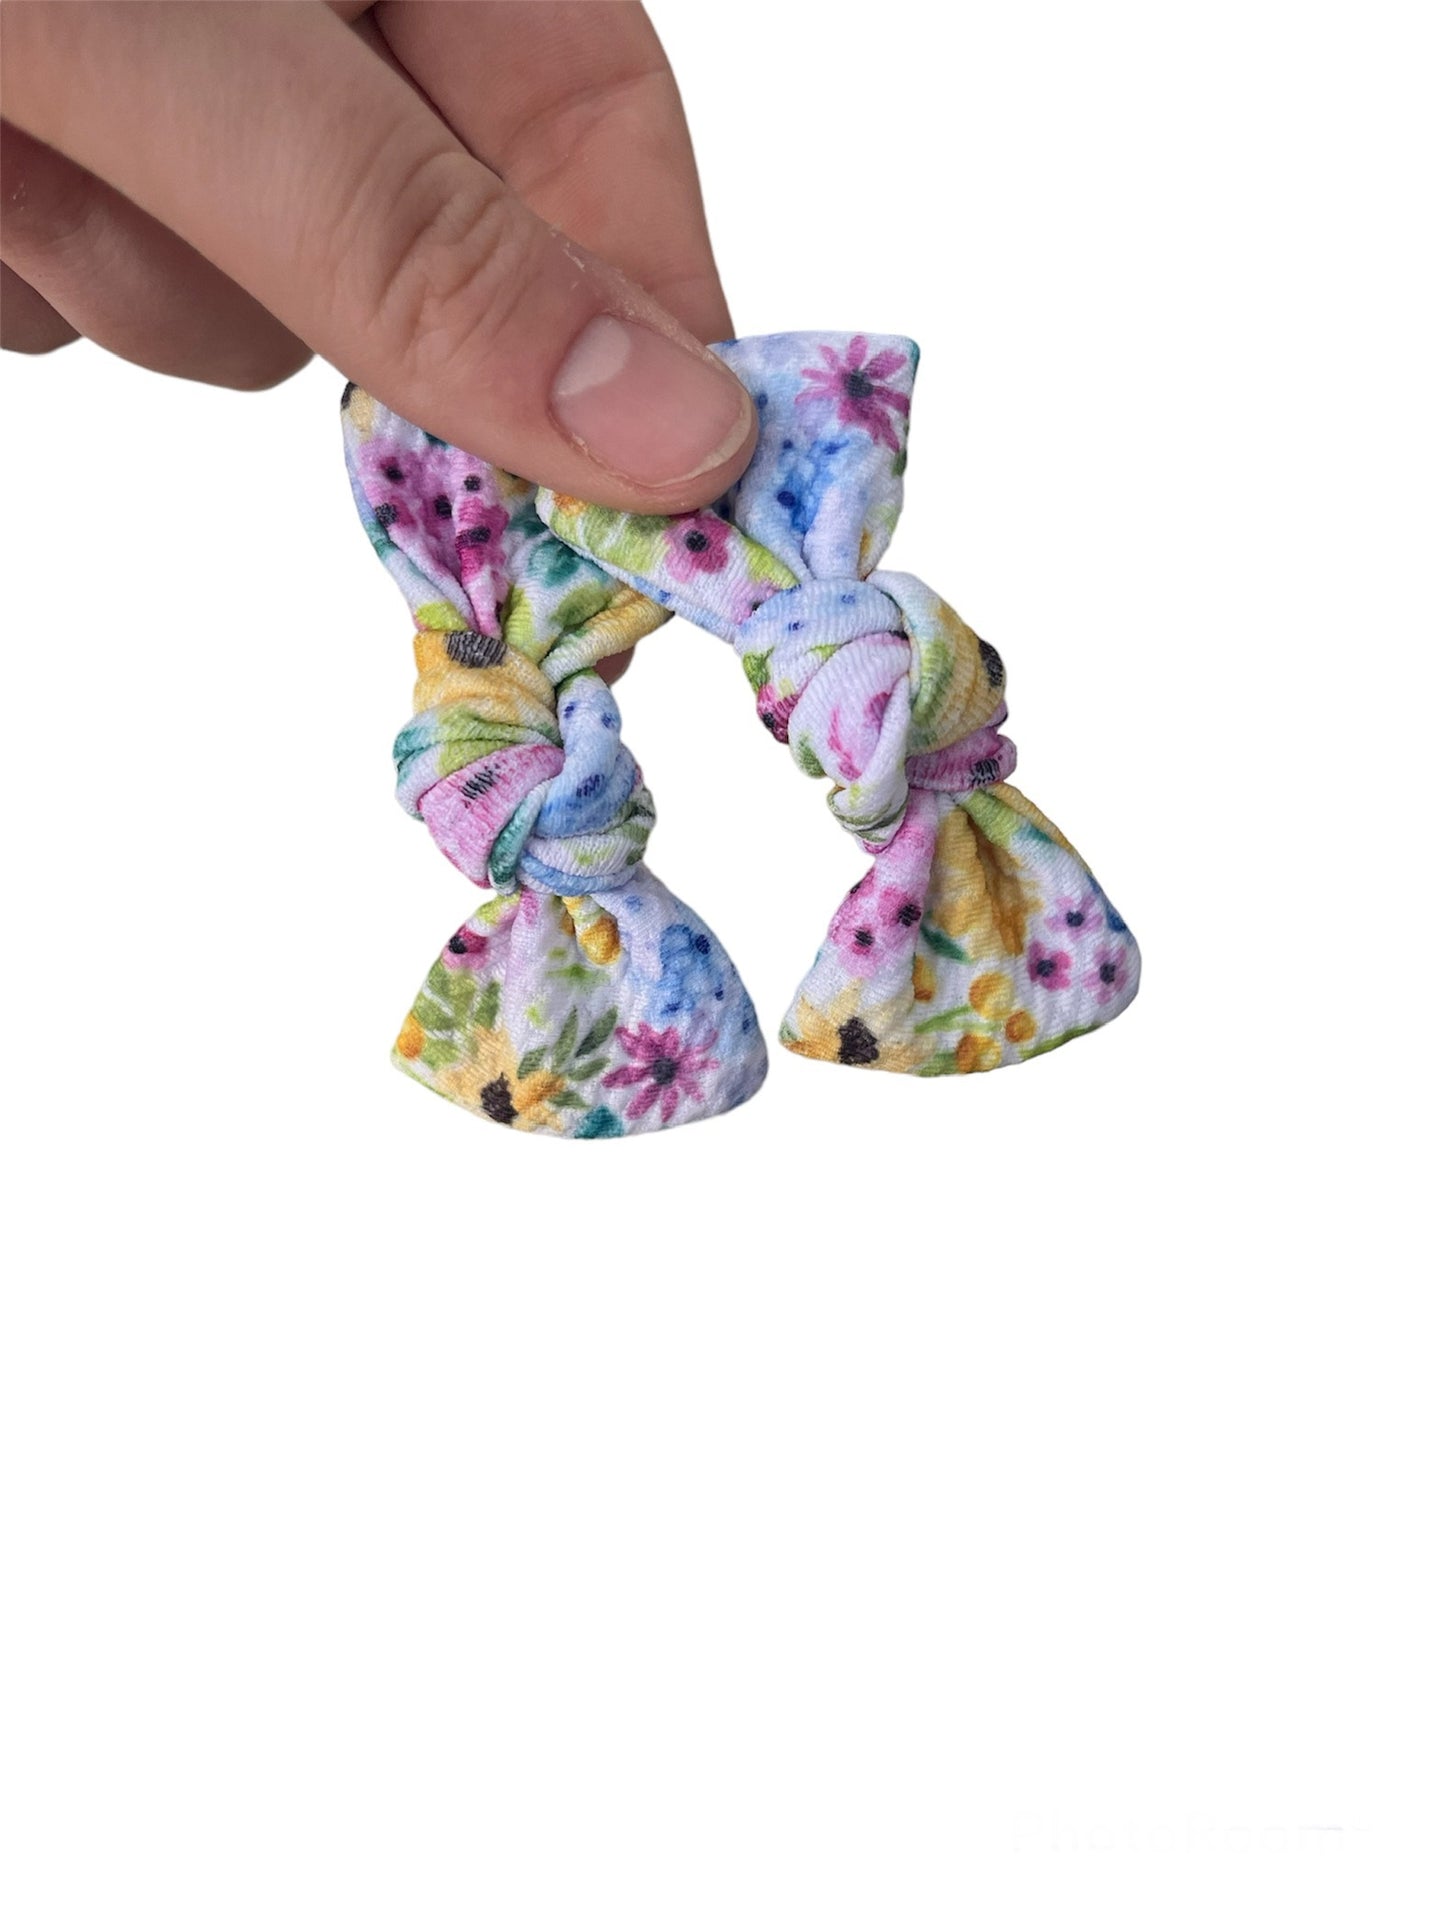 Spring Floral Knotted Pigtail Bows!